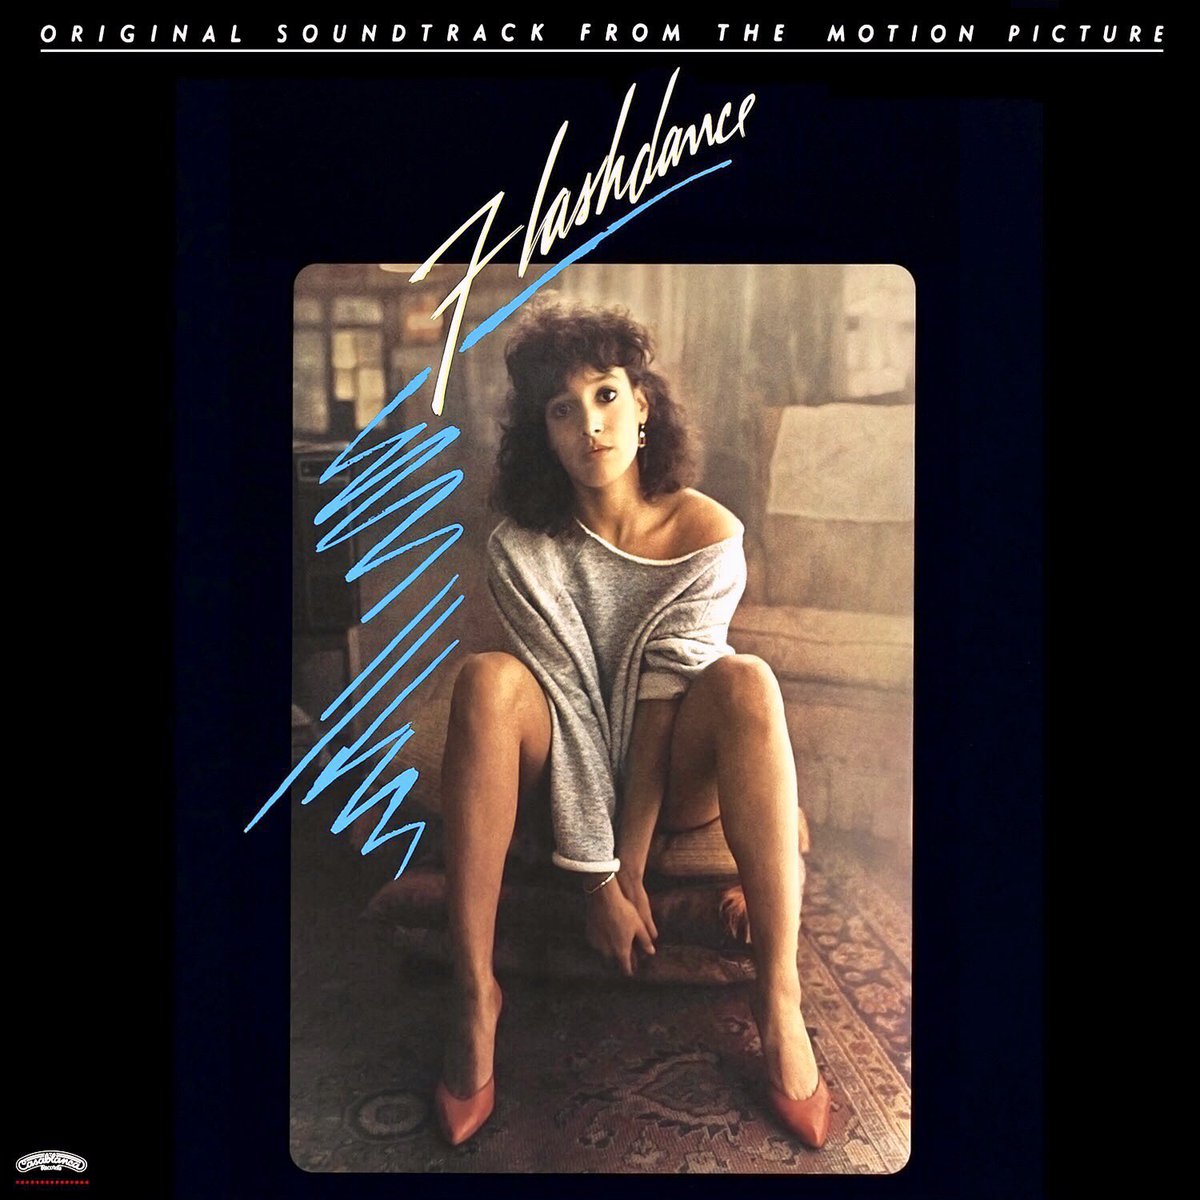 🎶’Flashdance: Original Soundtrack from the Motion Picture’ was released 41 years ago, April 11, 1983